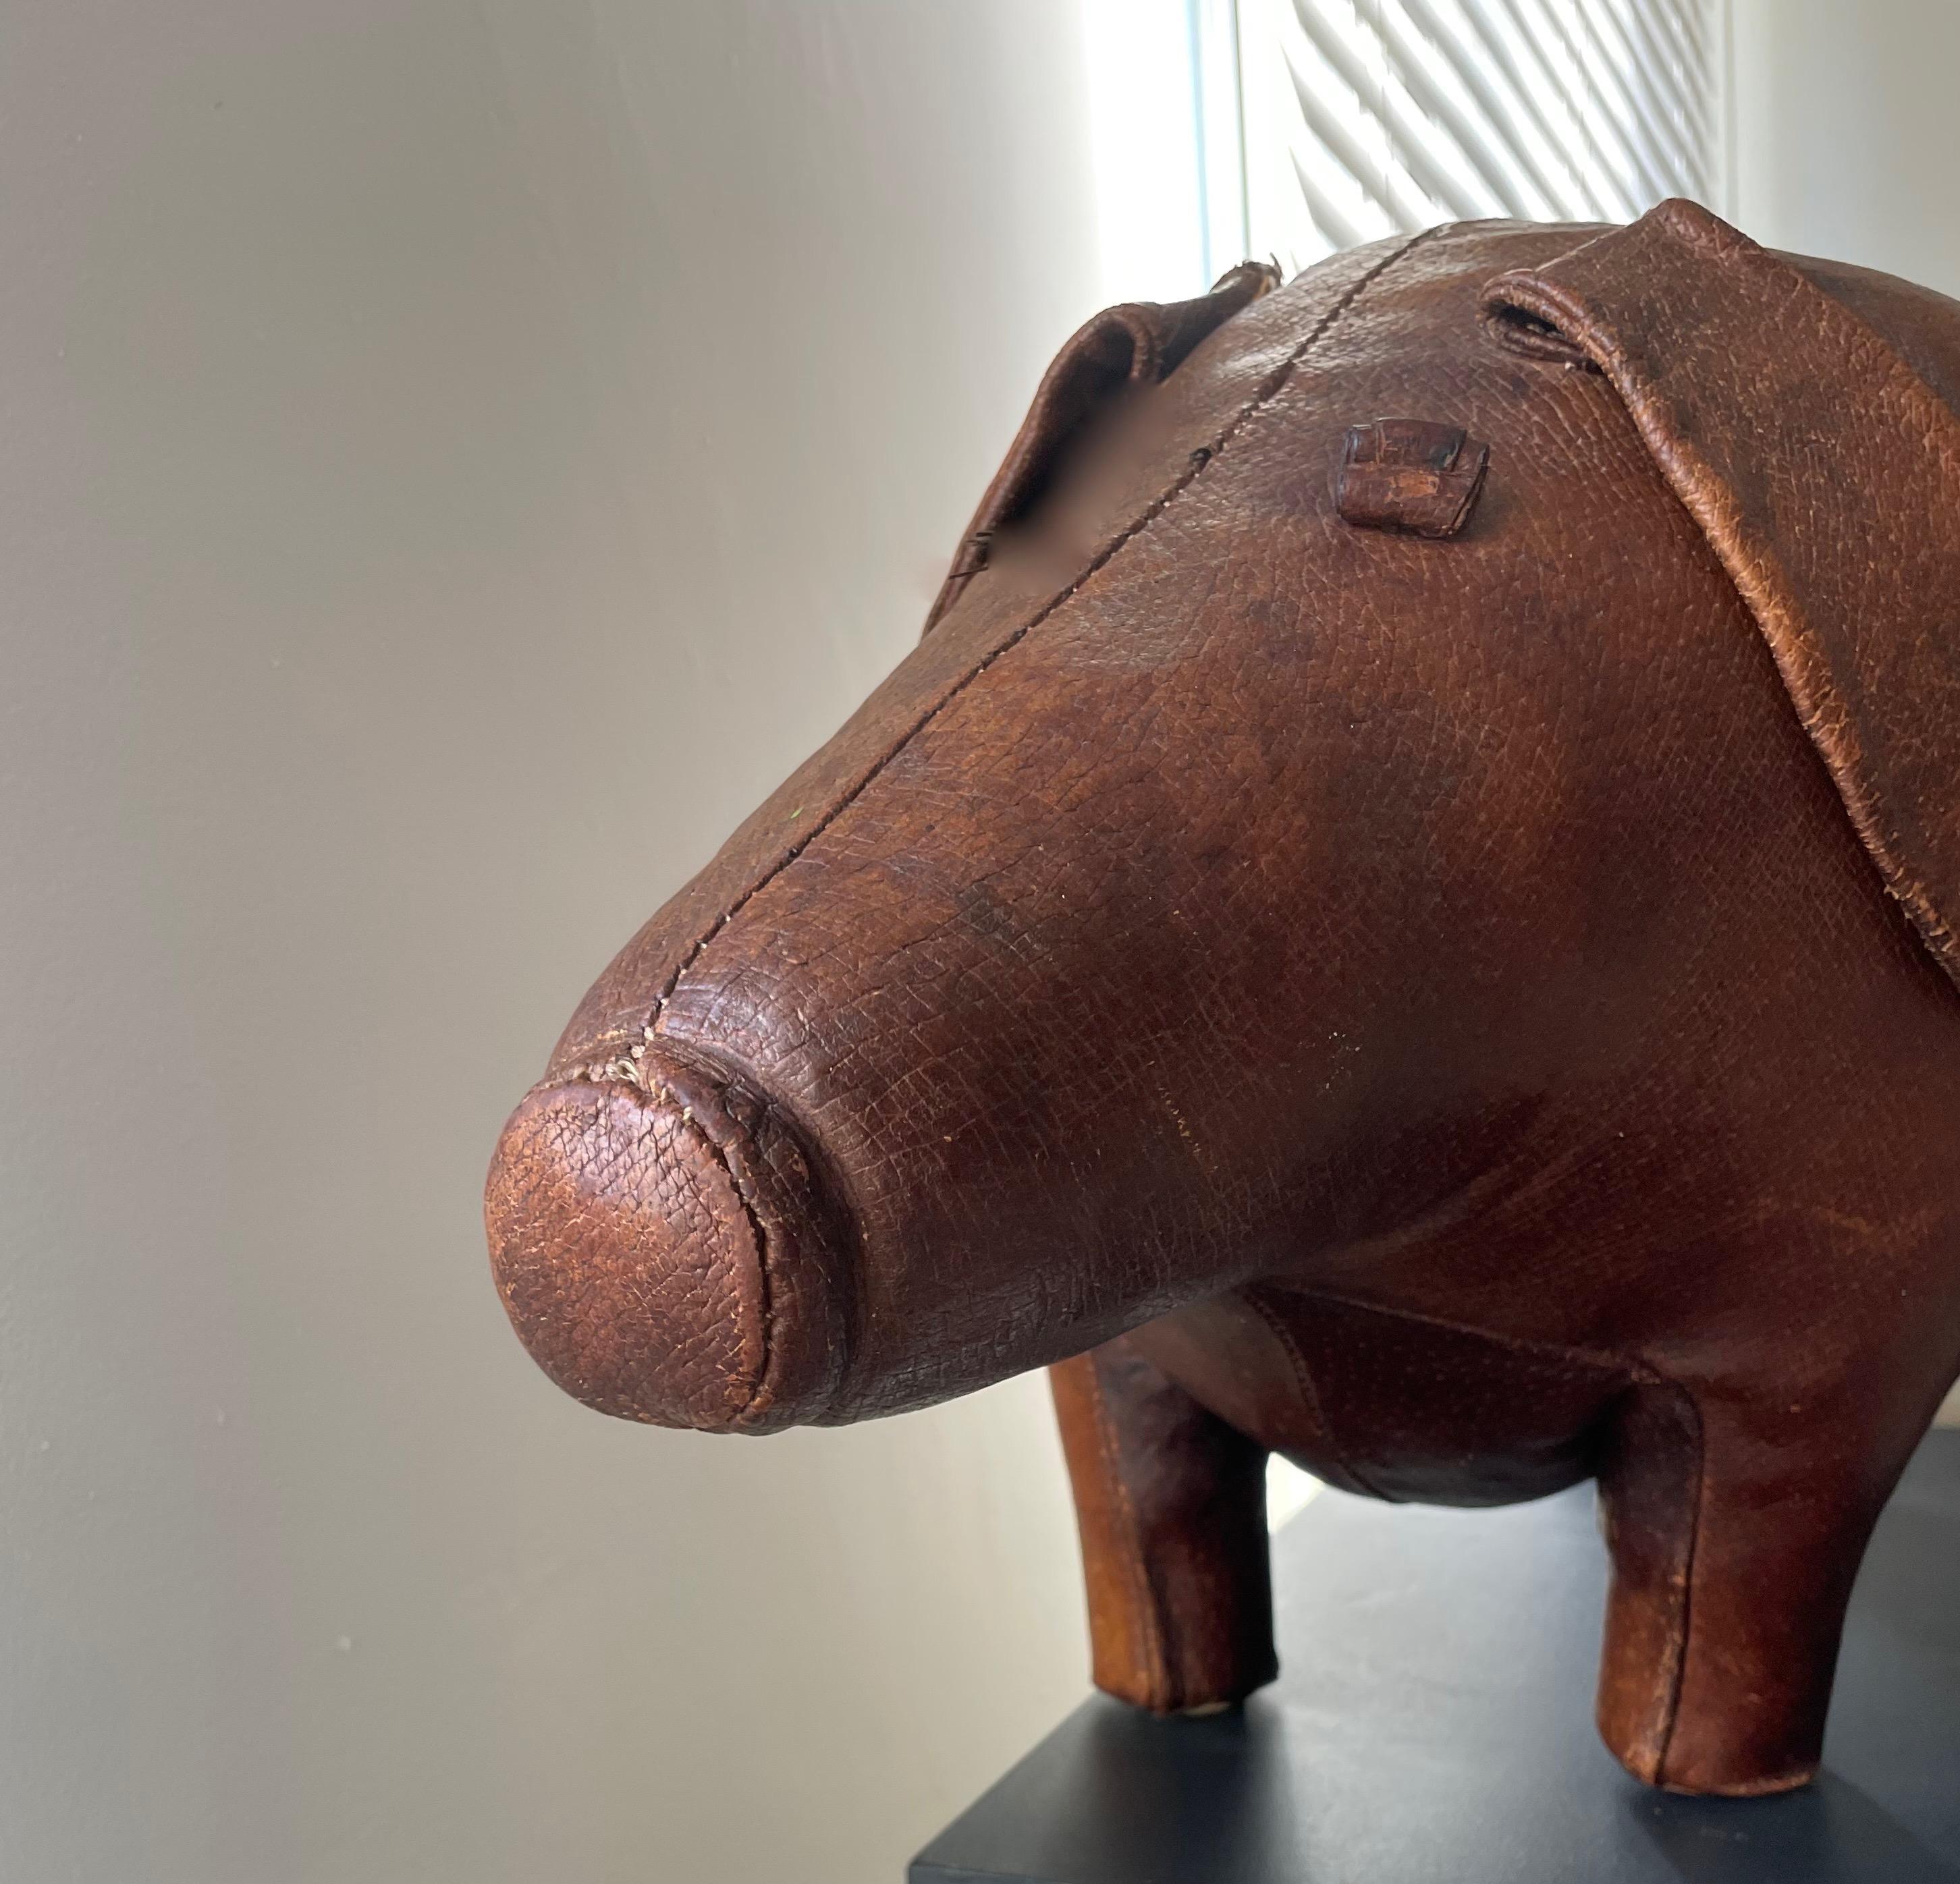 Pig ottoman first made in the 1930's for Liberty 's London during decades and later for Abercrombie & Fitch.
By Dimitri Omersa, United Kingdom.